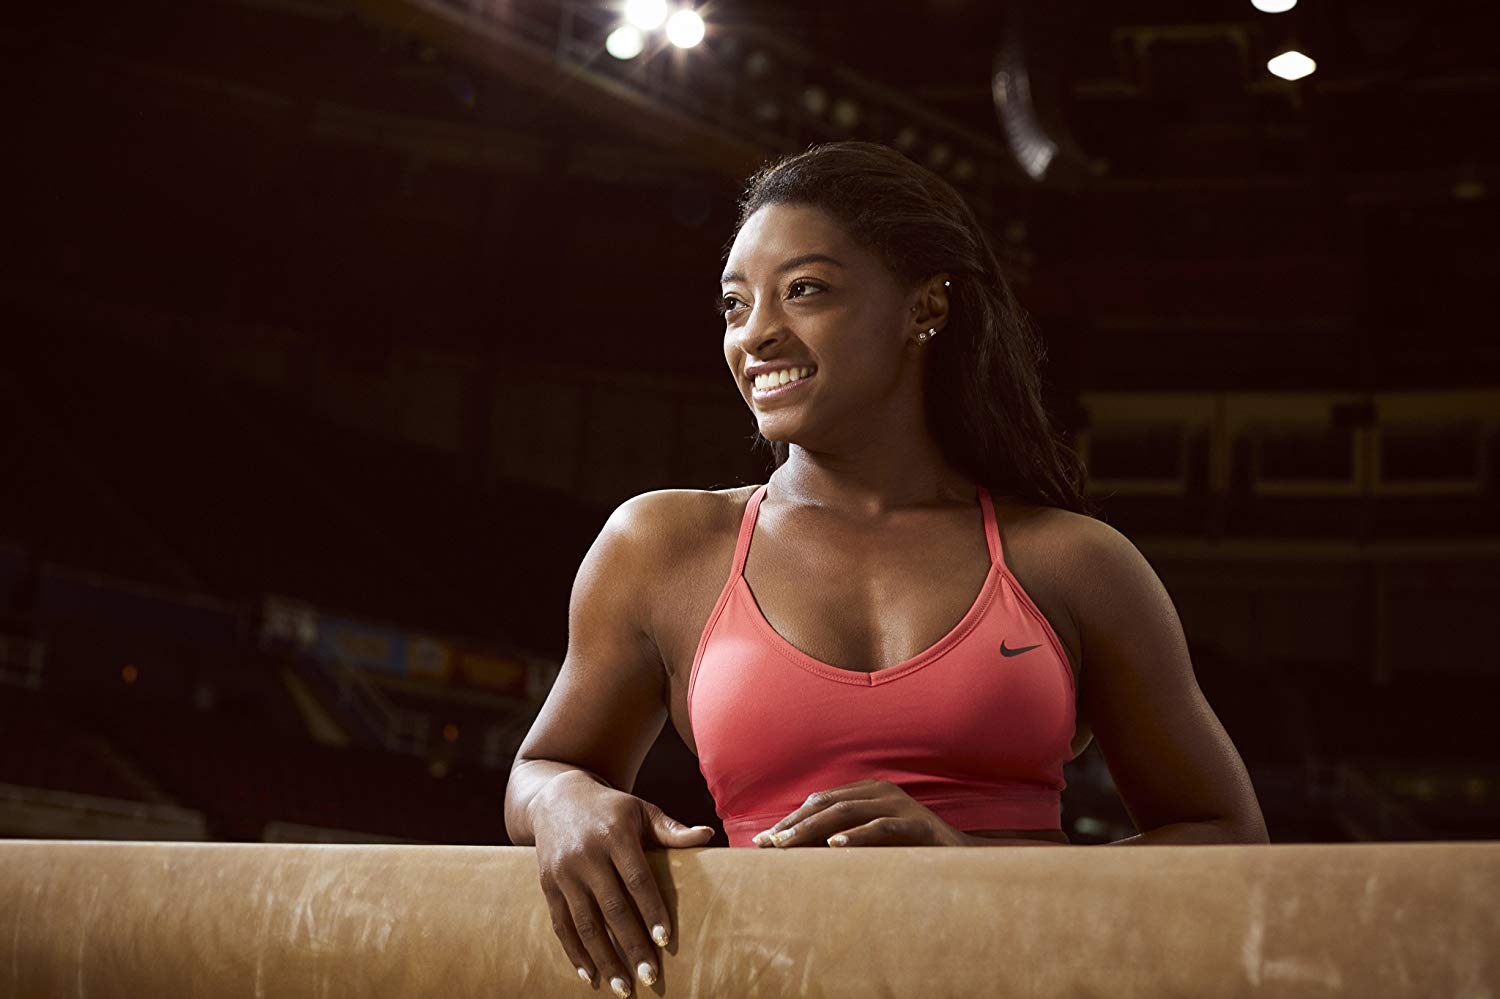 Watch The Simone Biles Story: Courage to Soar